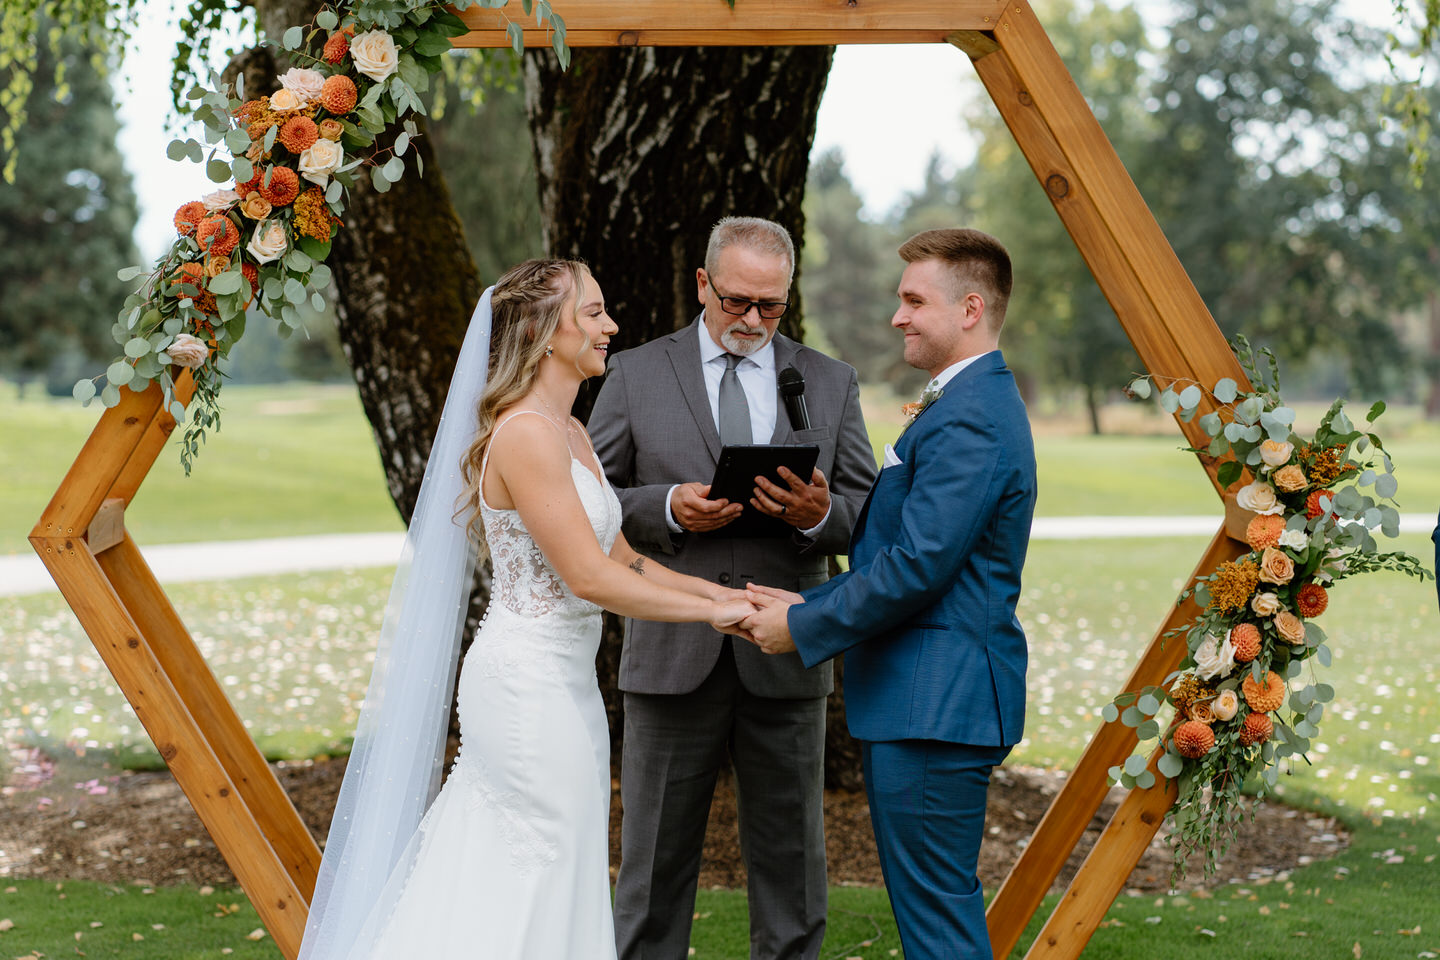 Bride and groom holding hands during wedding ceremony with hexagonal arch